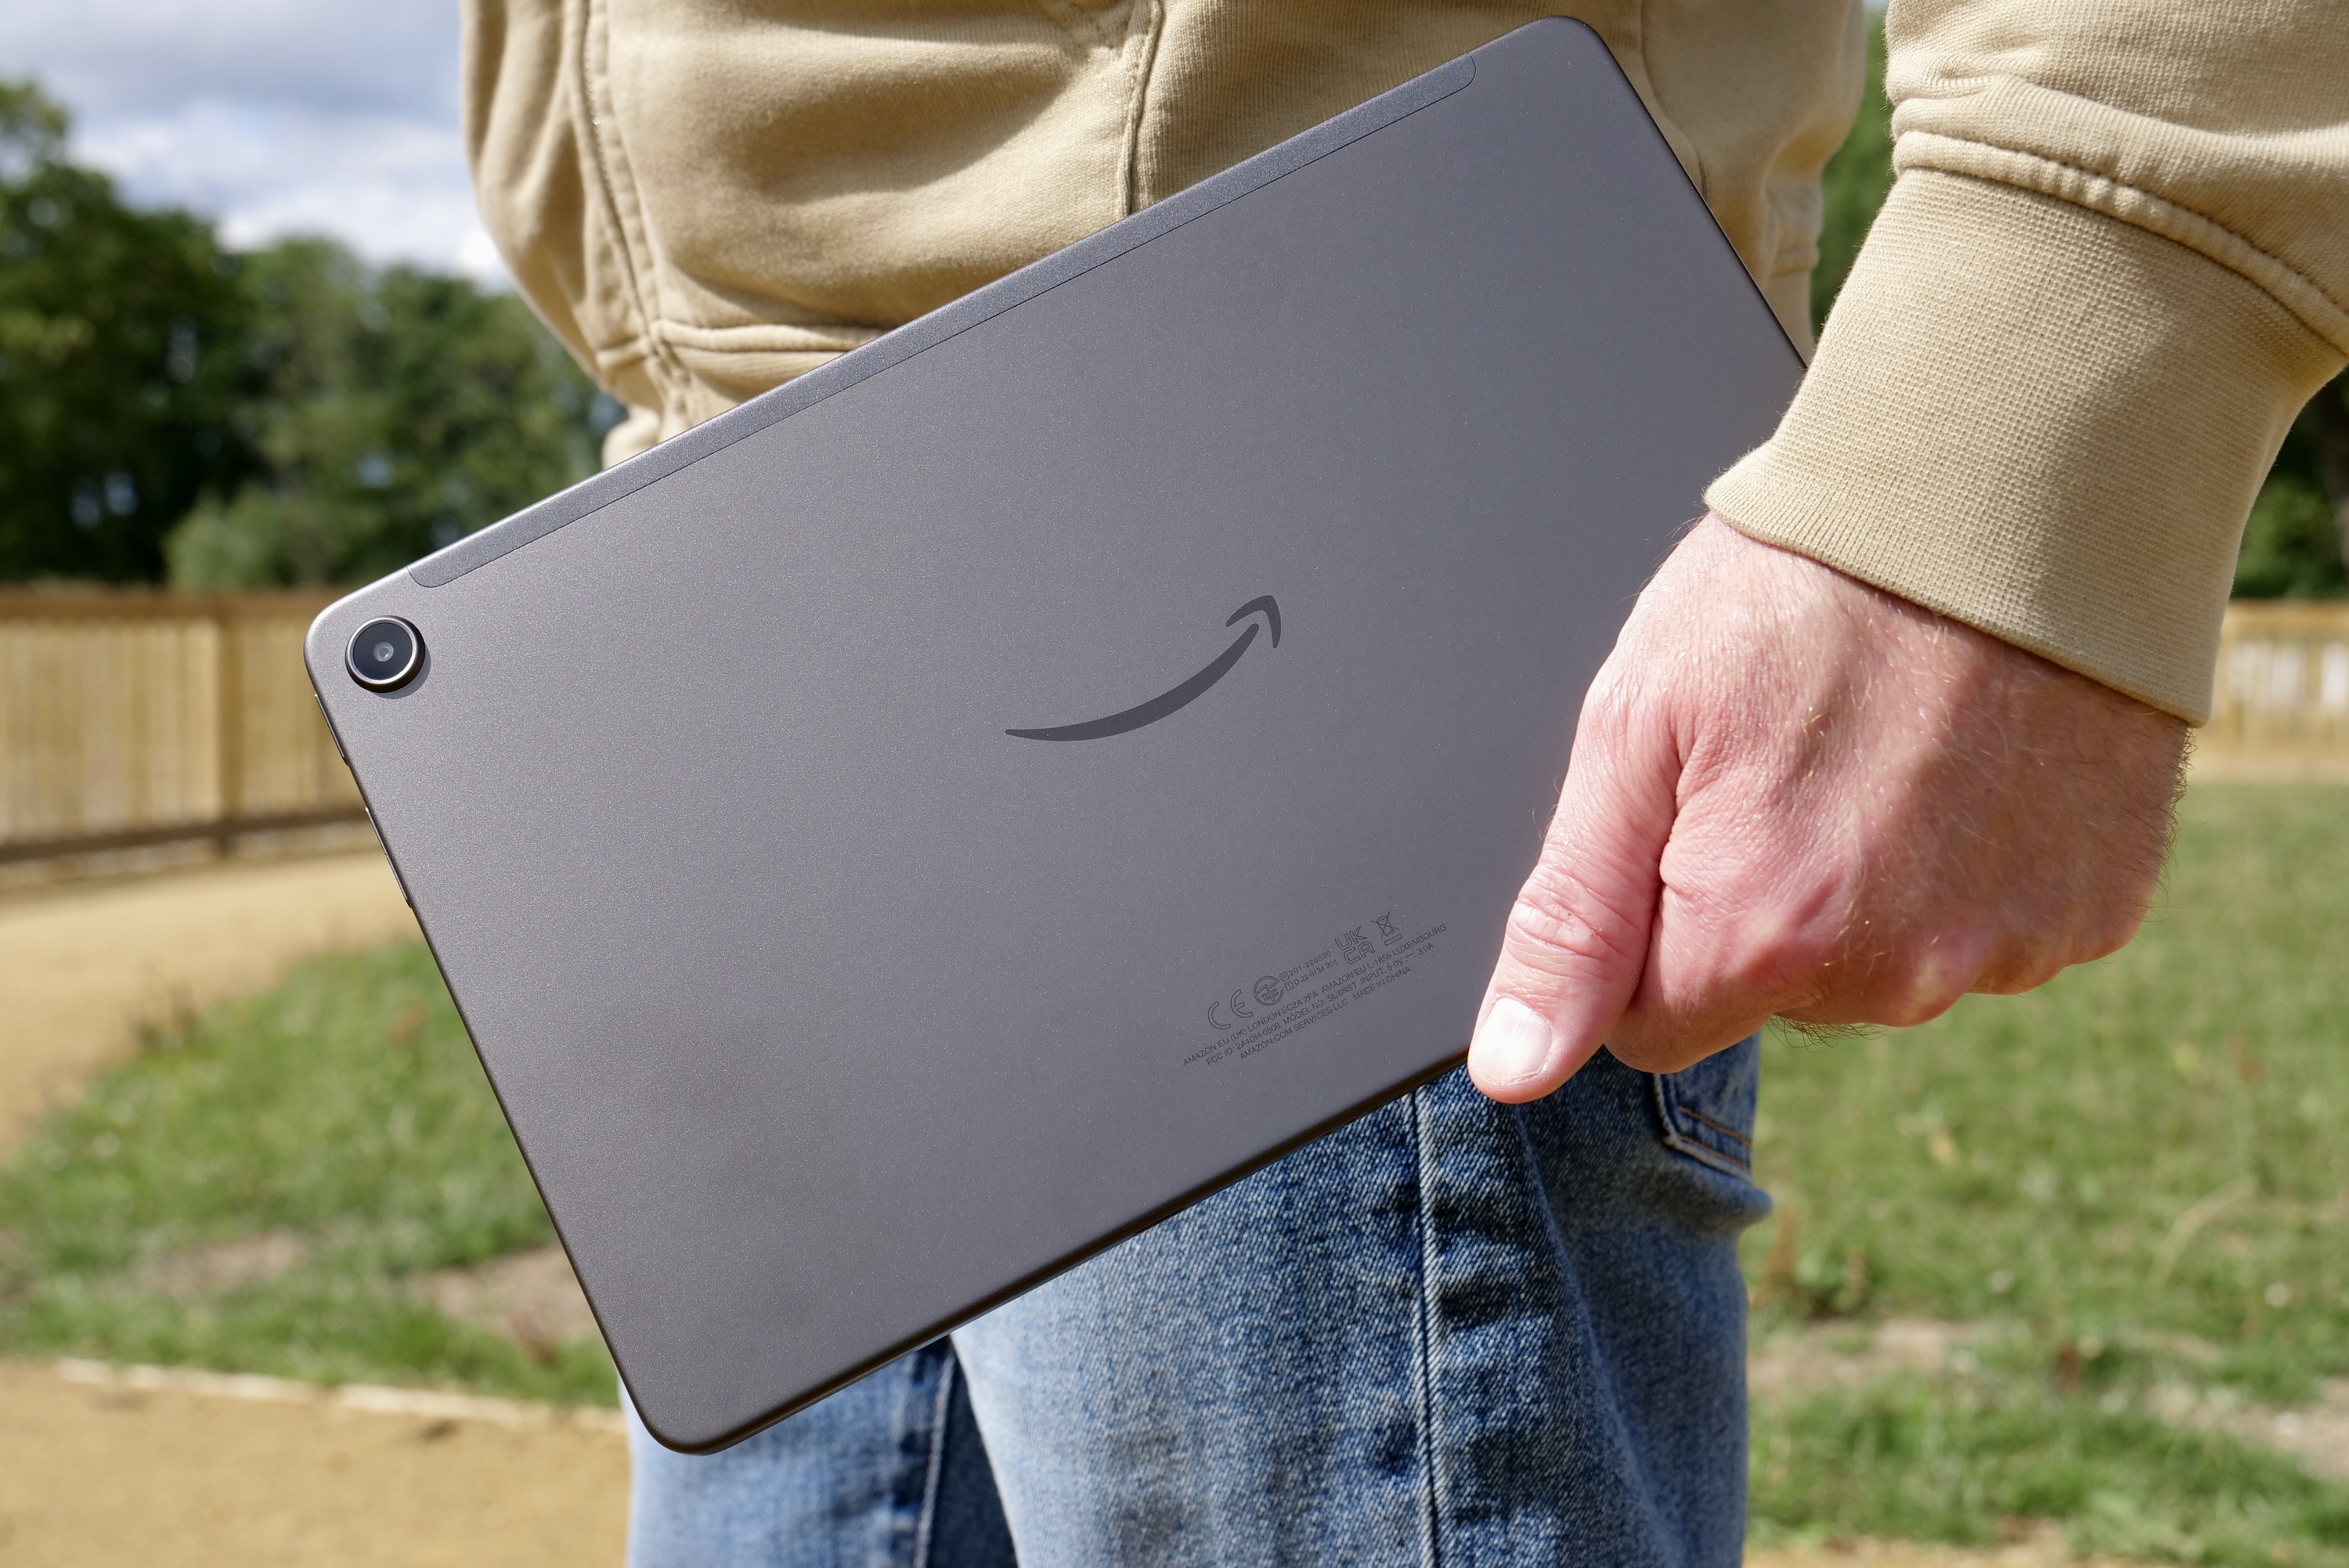 Amazon Fire Max 11 review: an Android tablet you should buy | Digital Trends